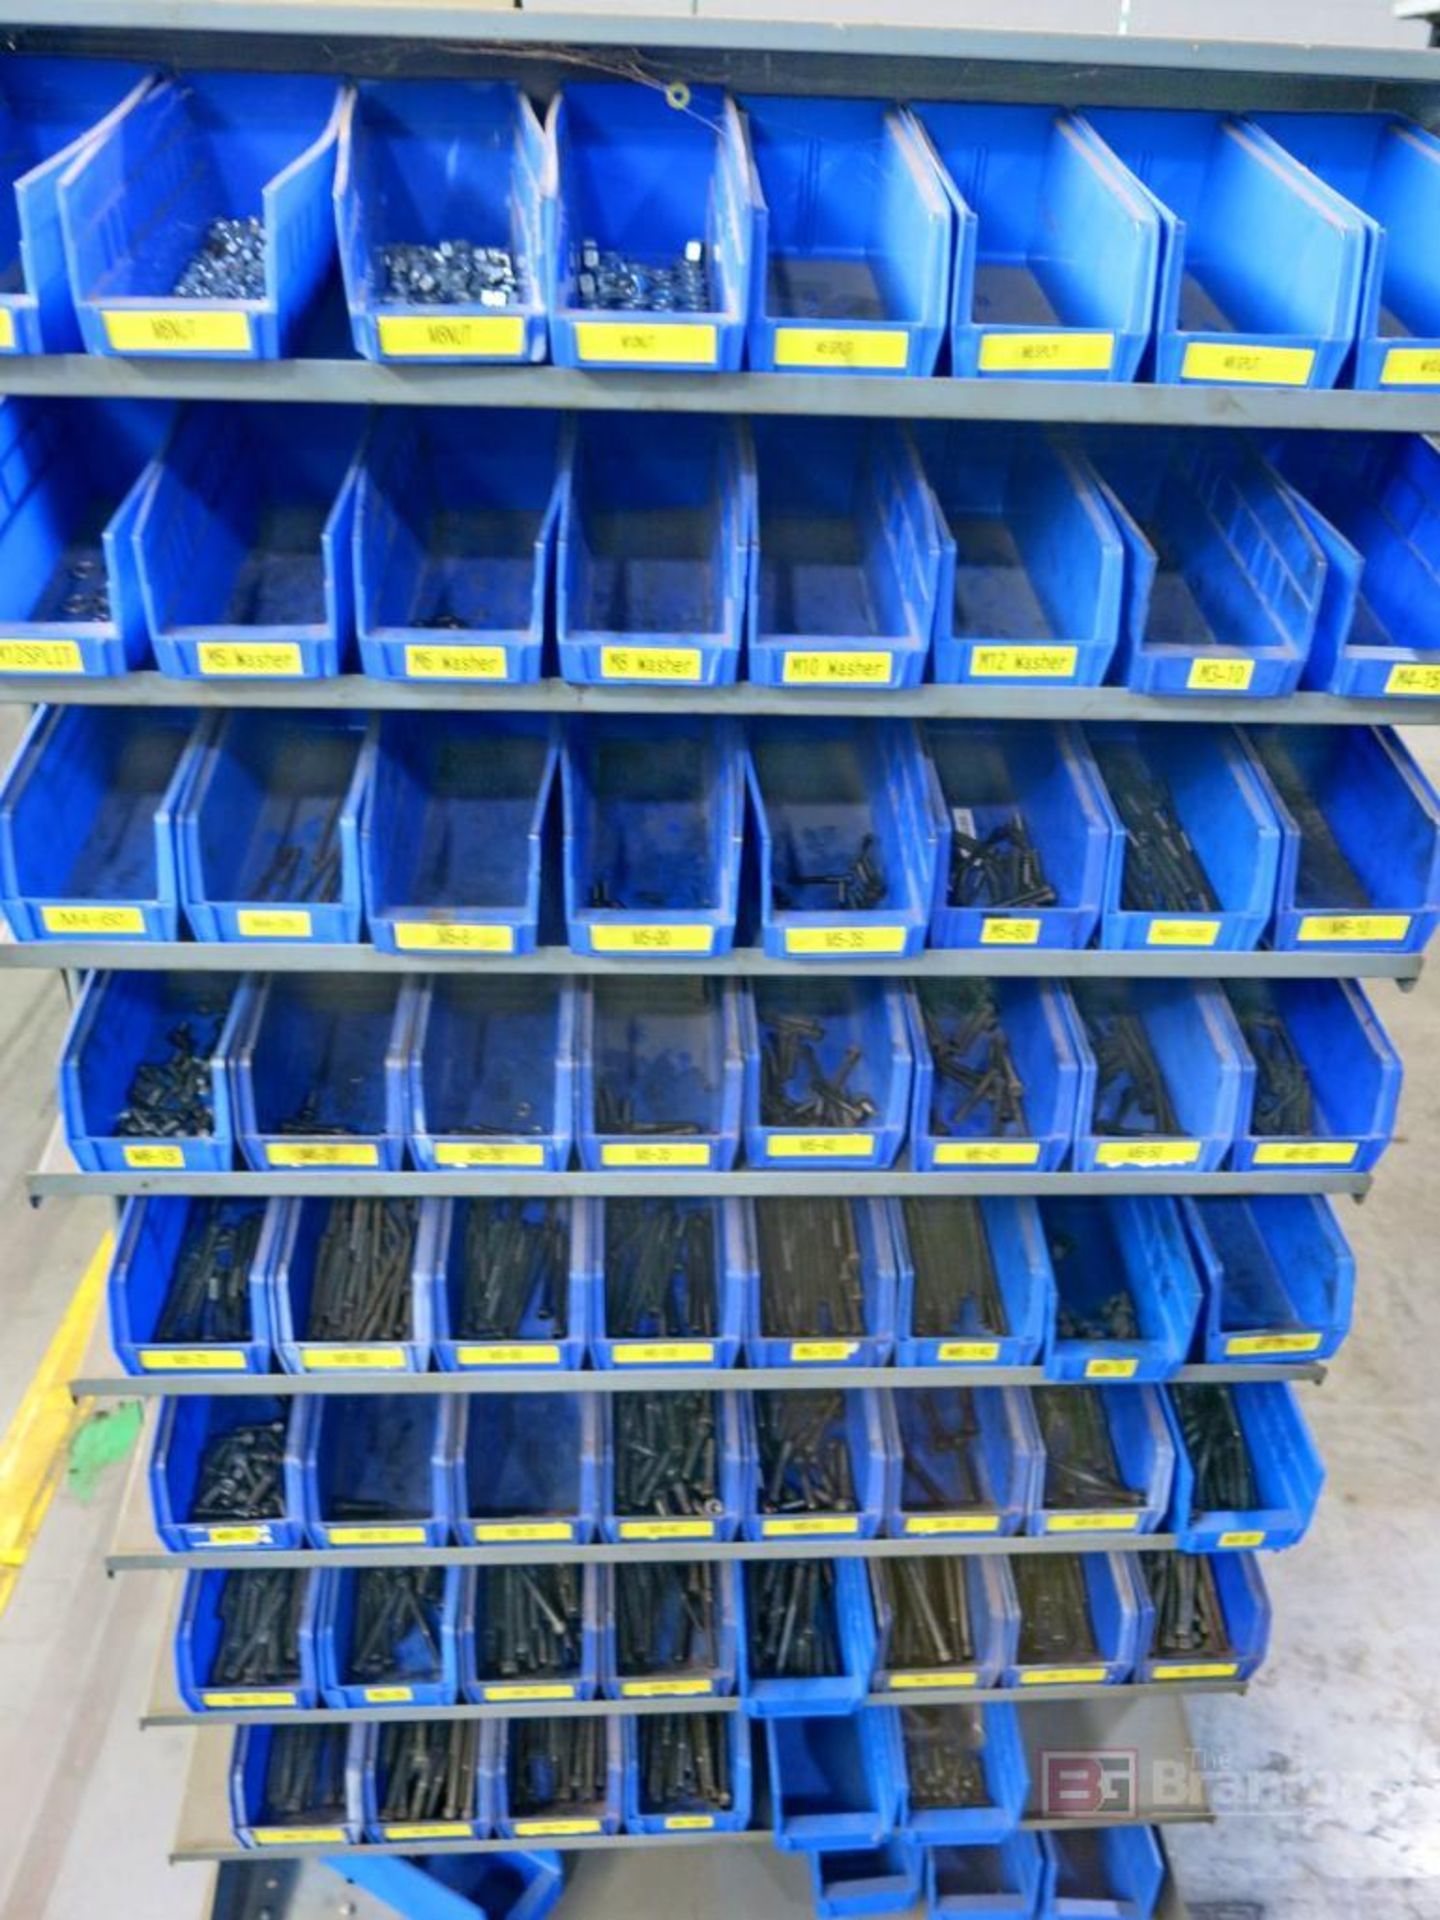 Double Sided Cantilever Arco Bin Rack w/ Contents - Image 3 of 3